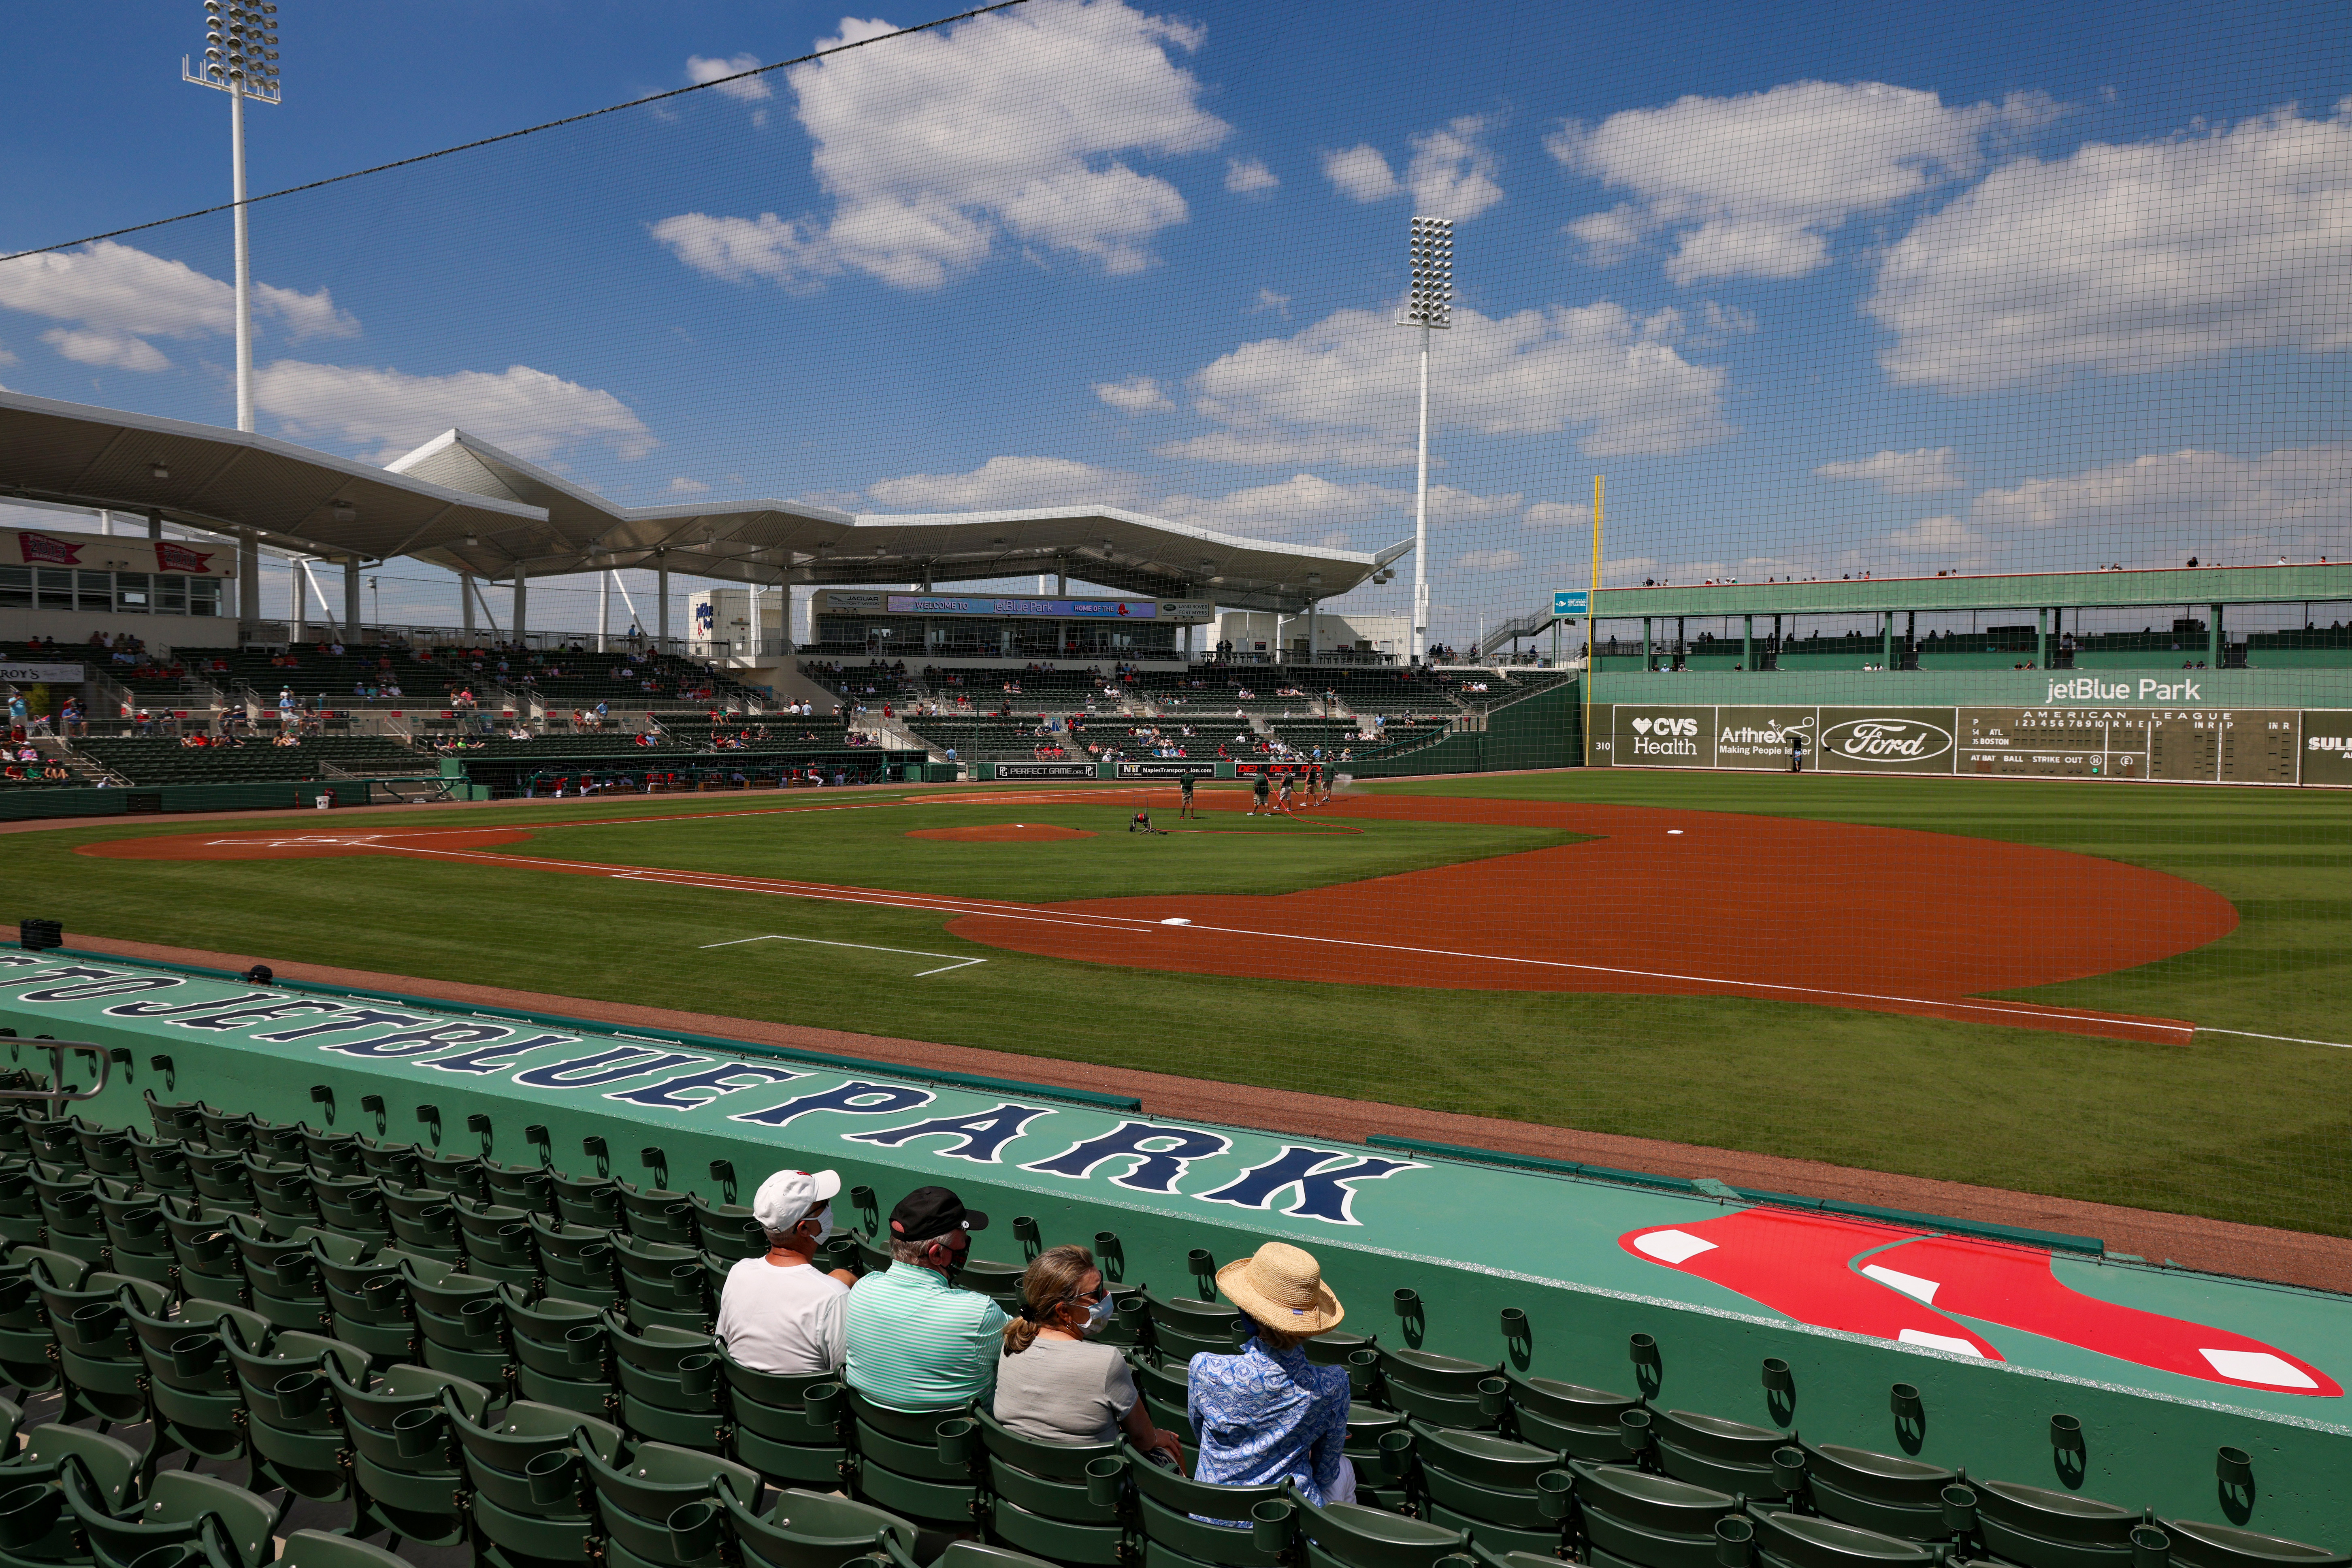 Here is the 2019 Red Sox spring training schedule - The Boston Globe